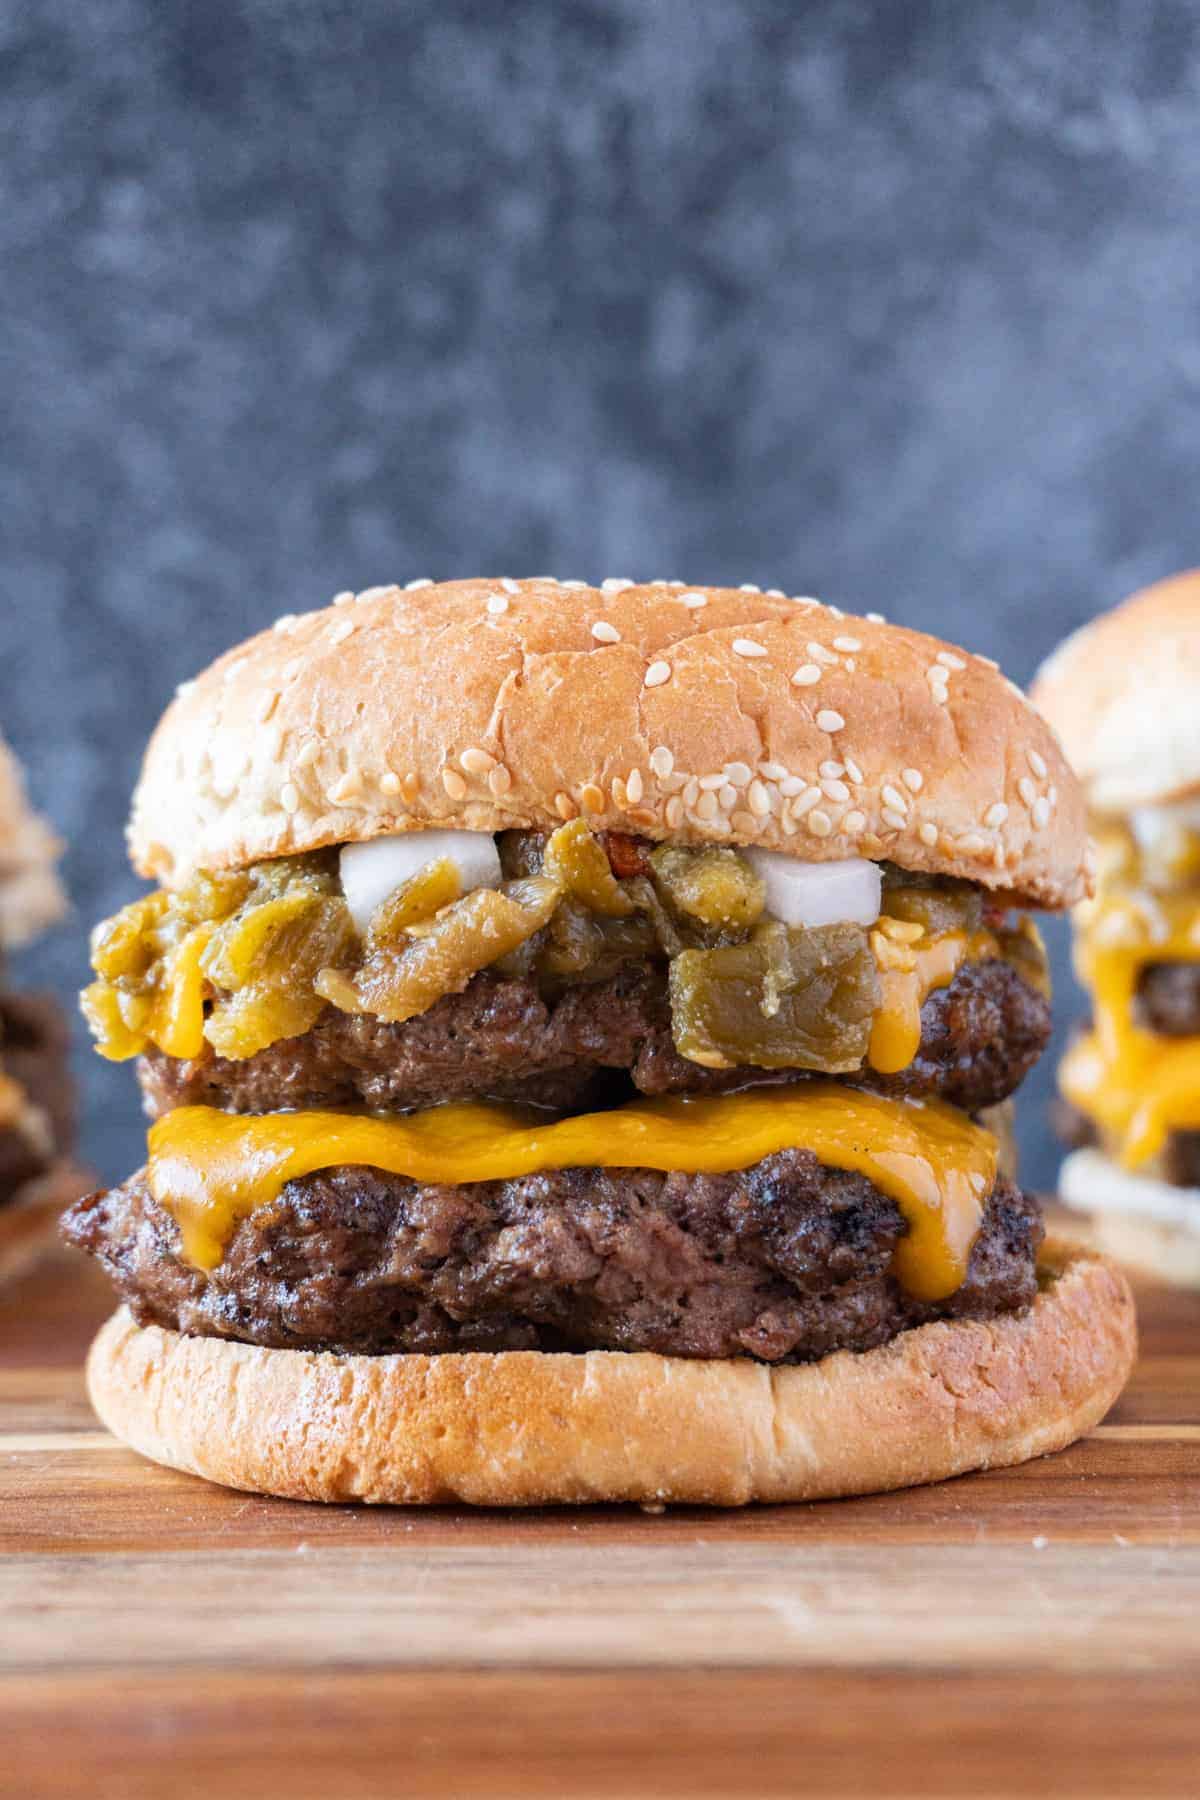 Double patty cheeseburger with green chile